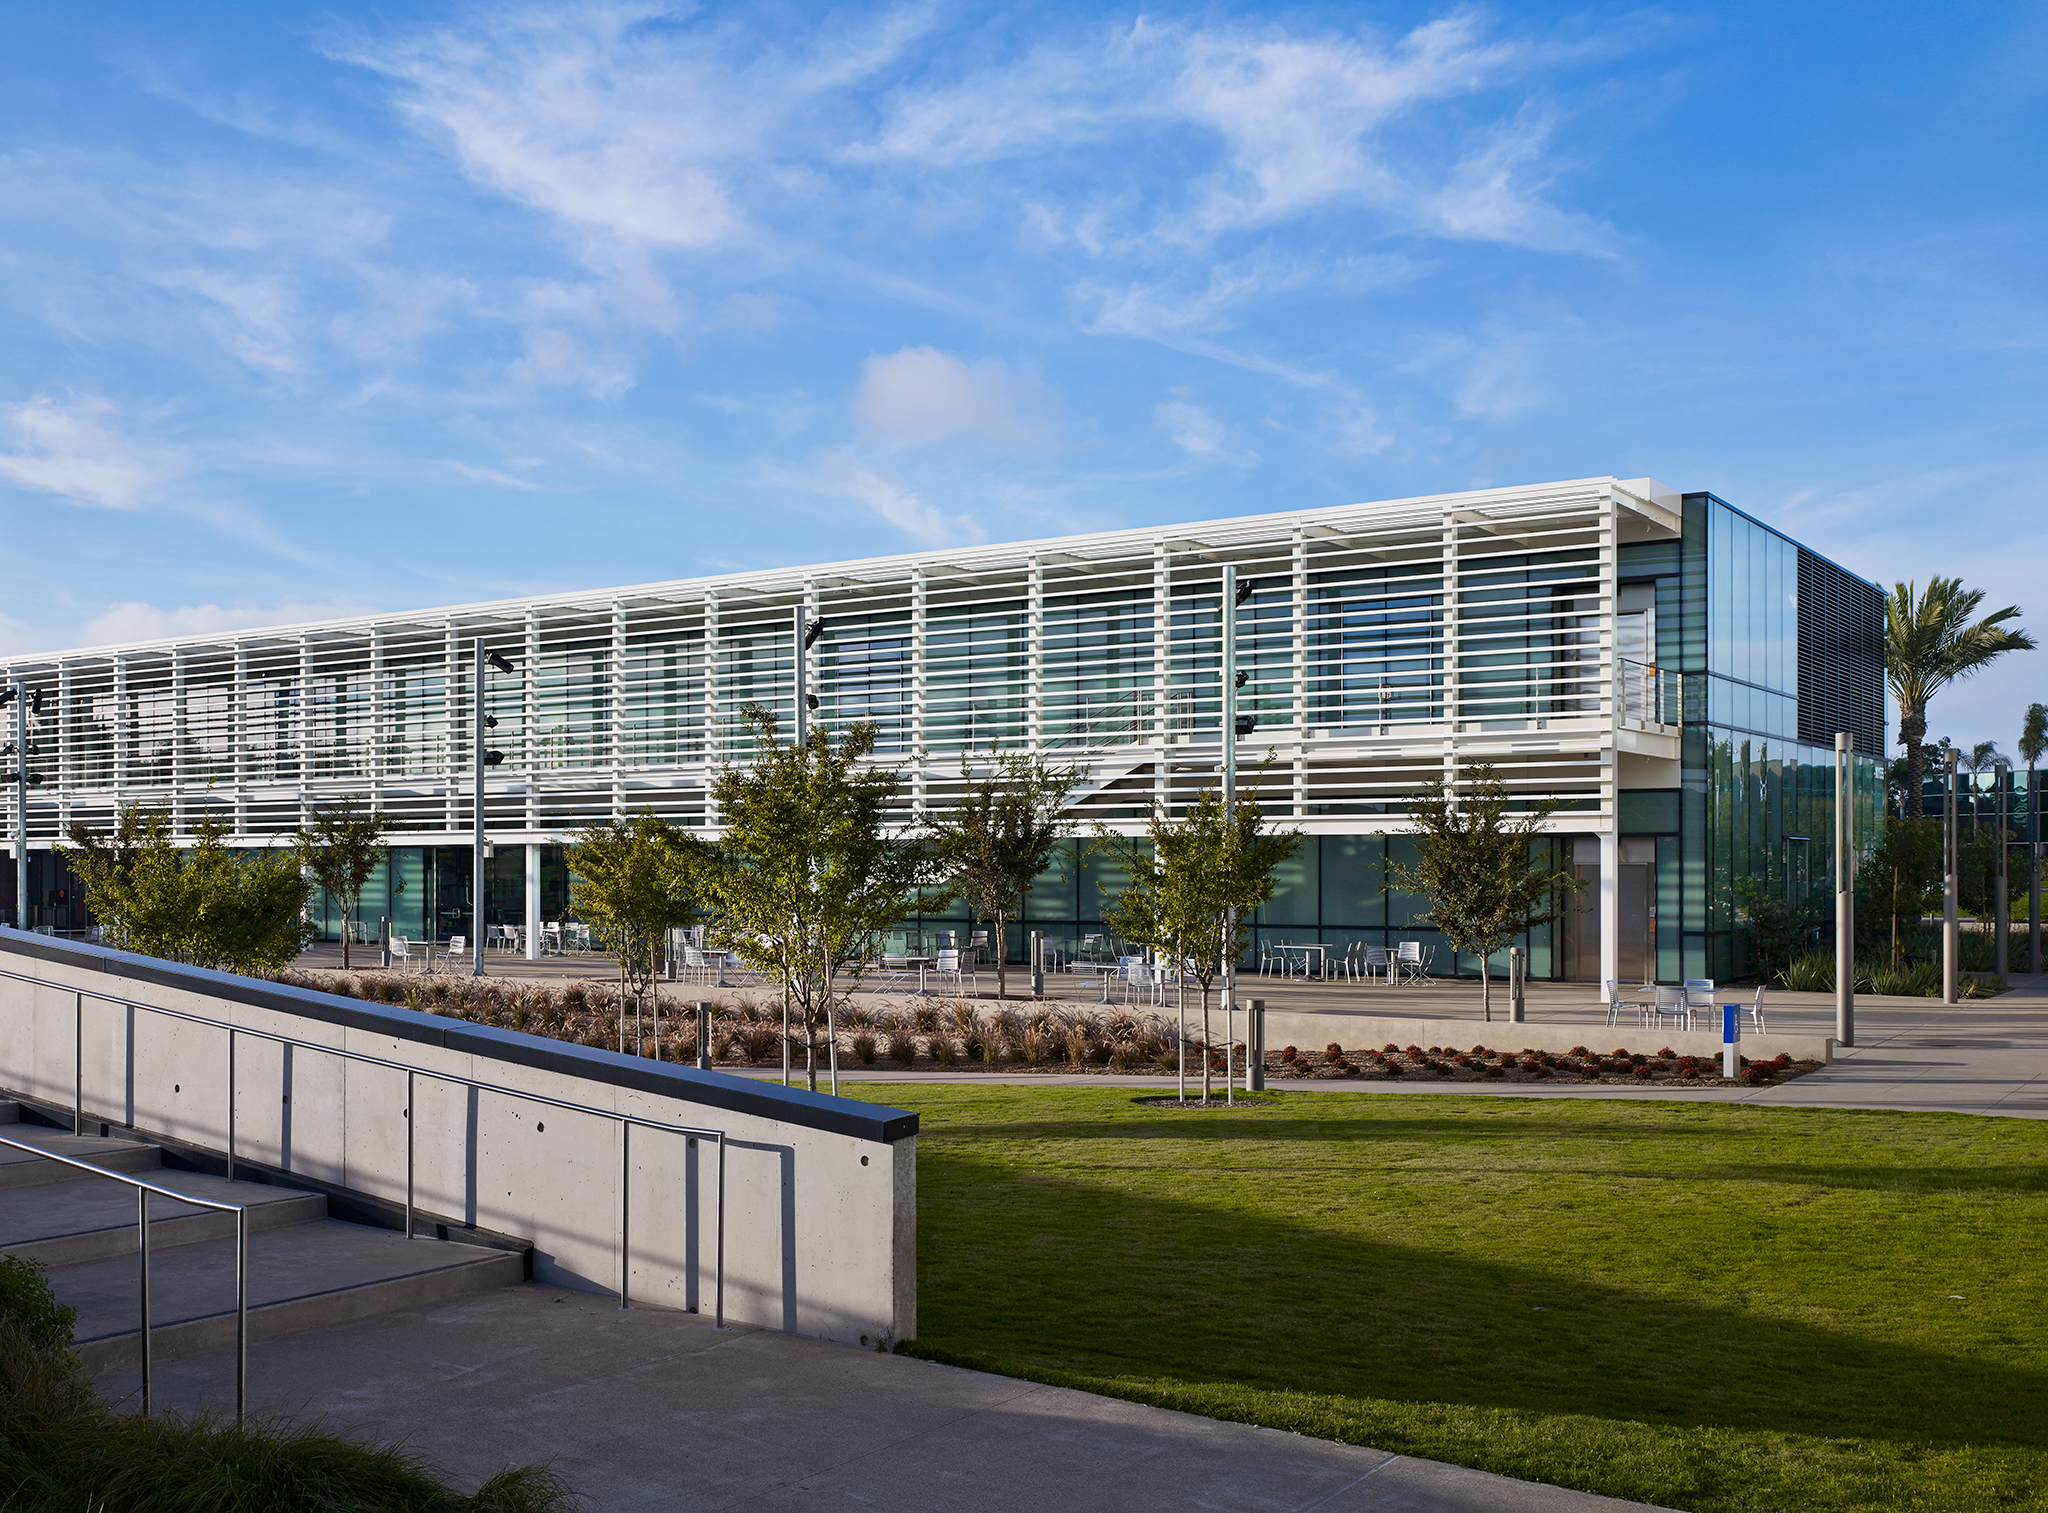  Pacific Center Campus  BNIM  San Diego, California      Return to Projects  